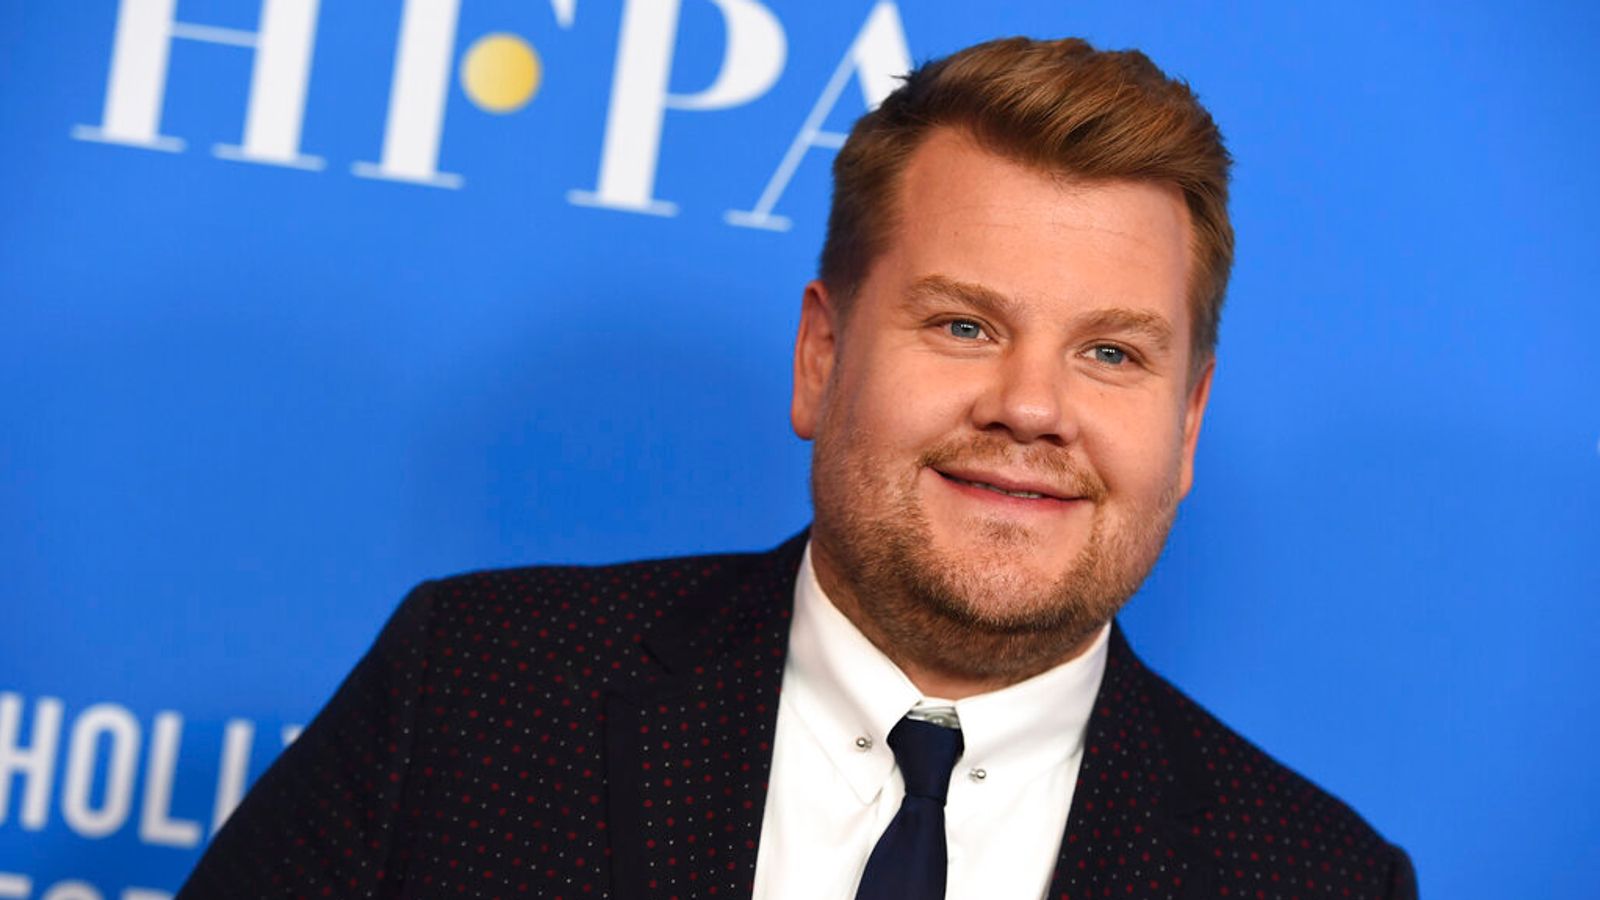 James Corden says he hasn't 'done anything wrong' and is 'so zen' after claims he abused restaurant staff